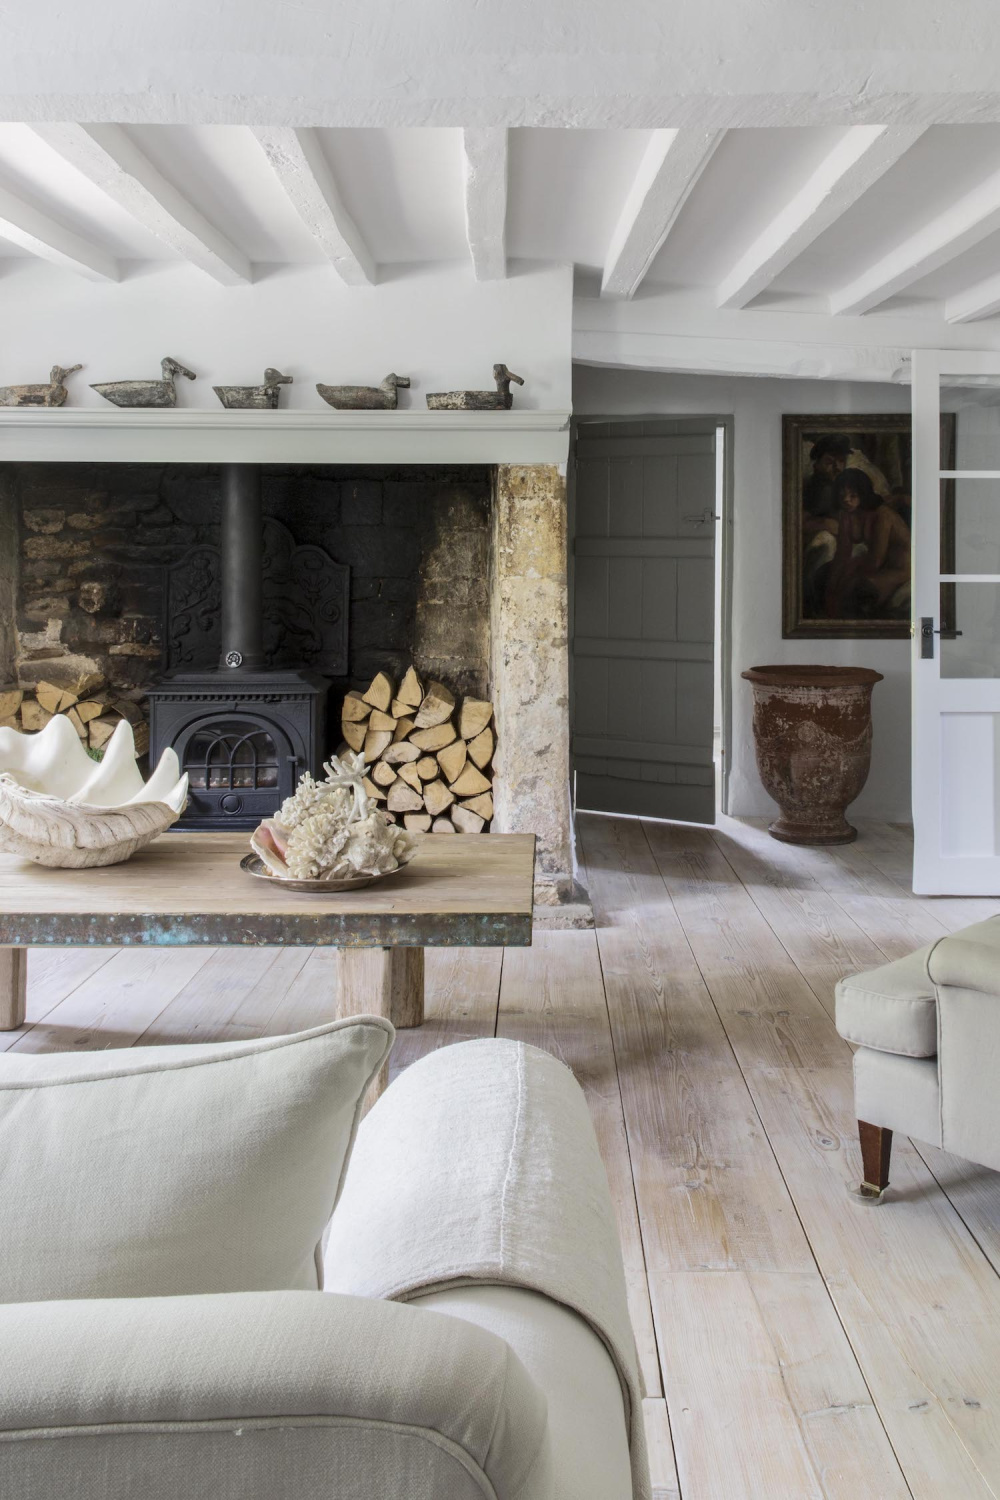 17th century Cotswolds cottage interior by Anton & K. #rusticcottage #fireplaces